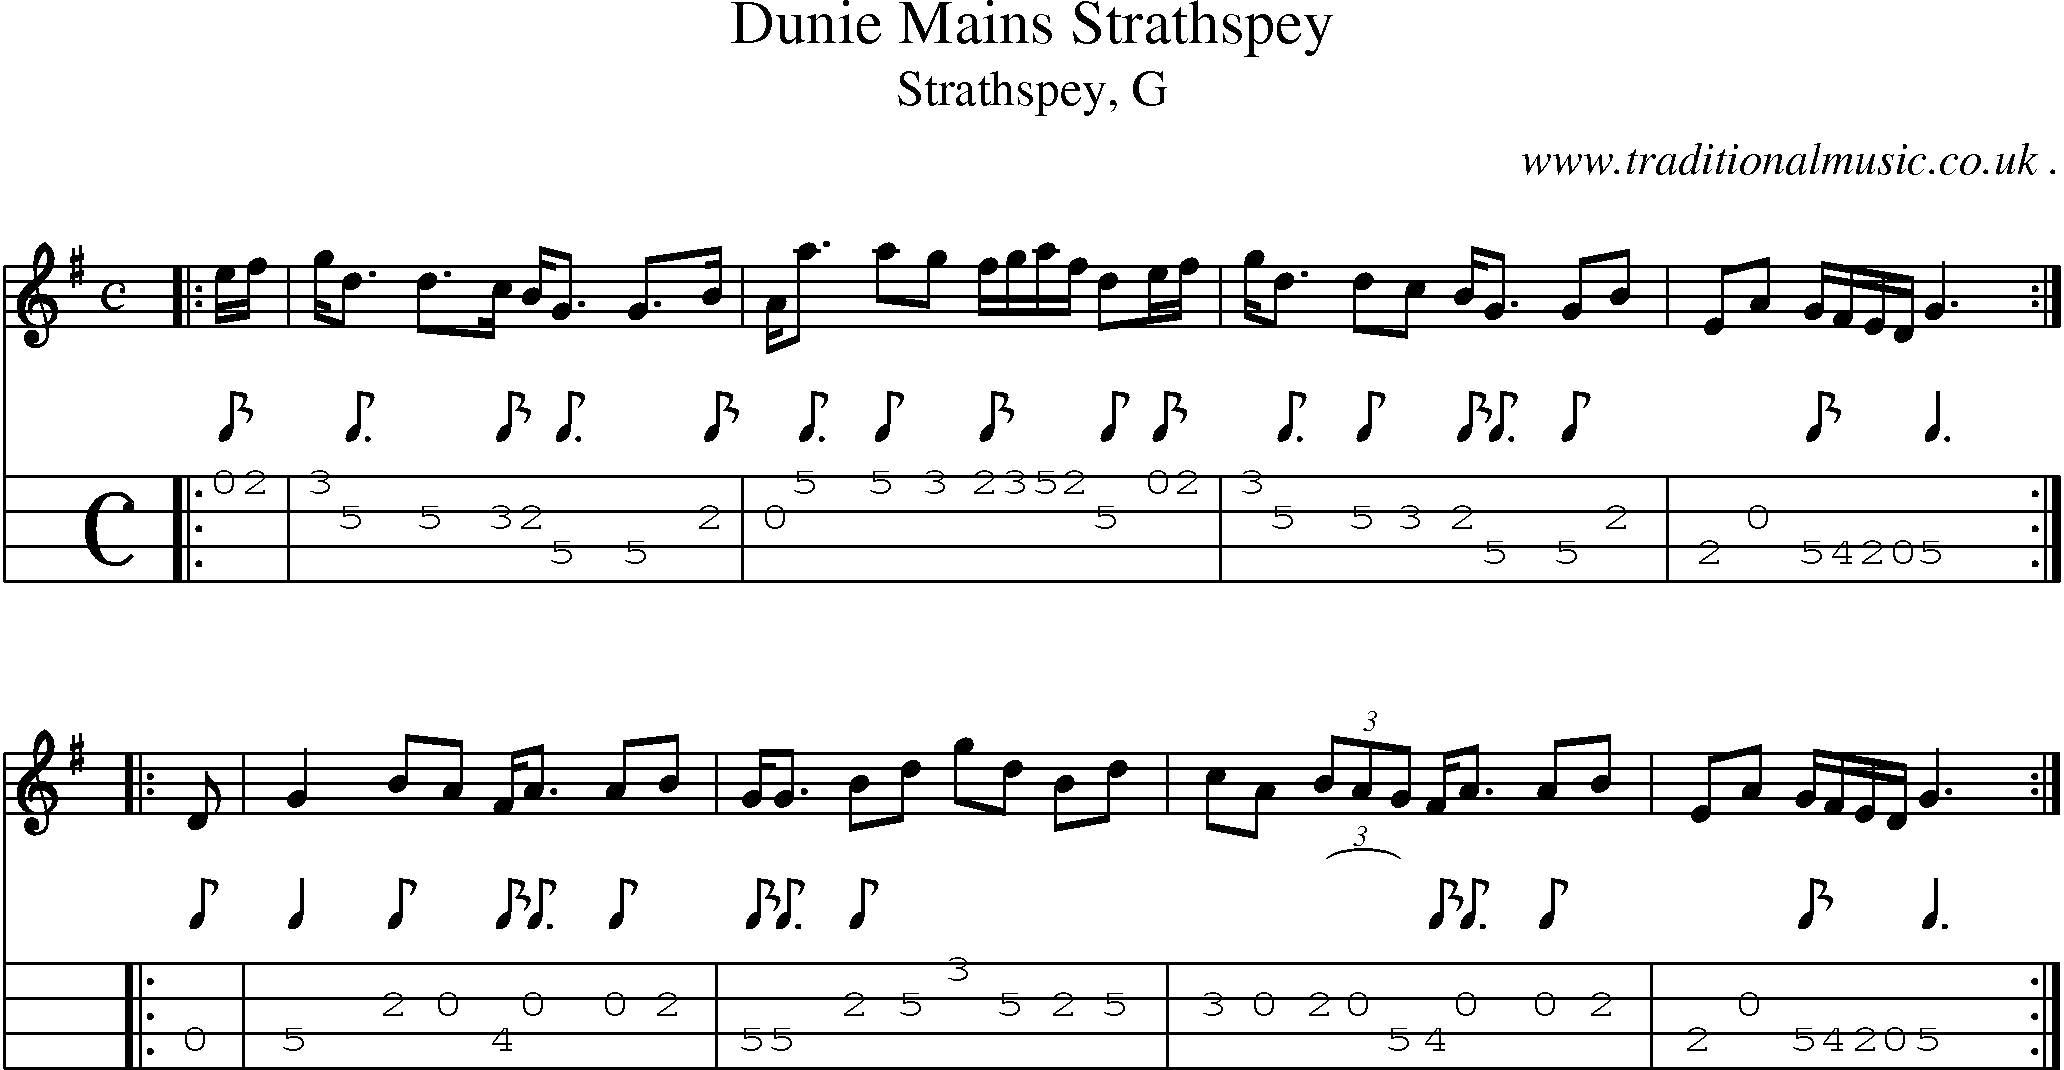 Sheet-music  score, Chords and Mandolin Tabs for Dunie Mains Strathspey